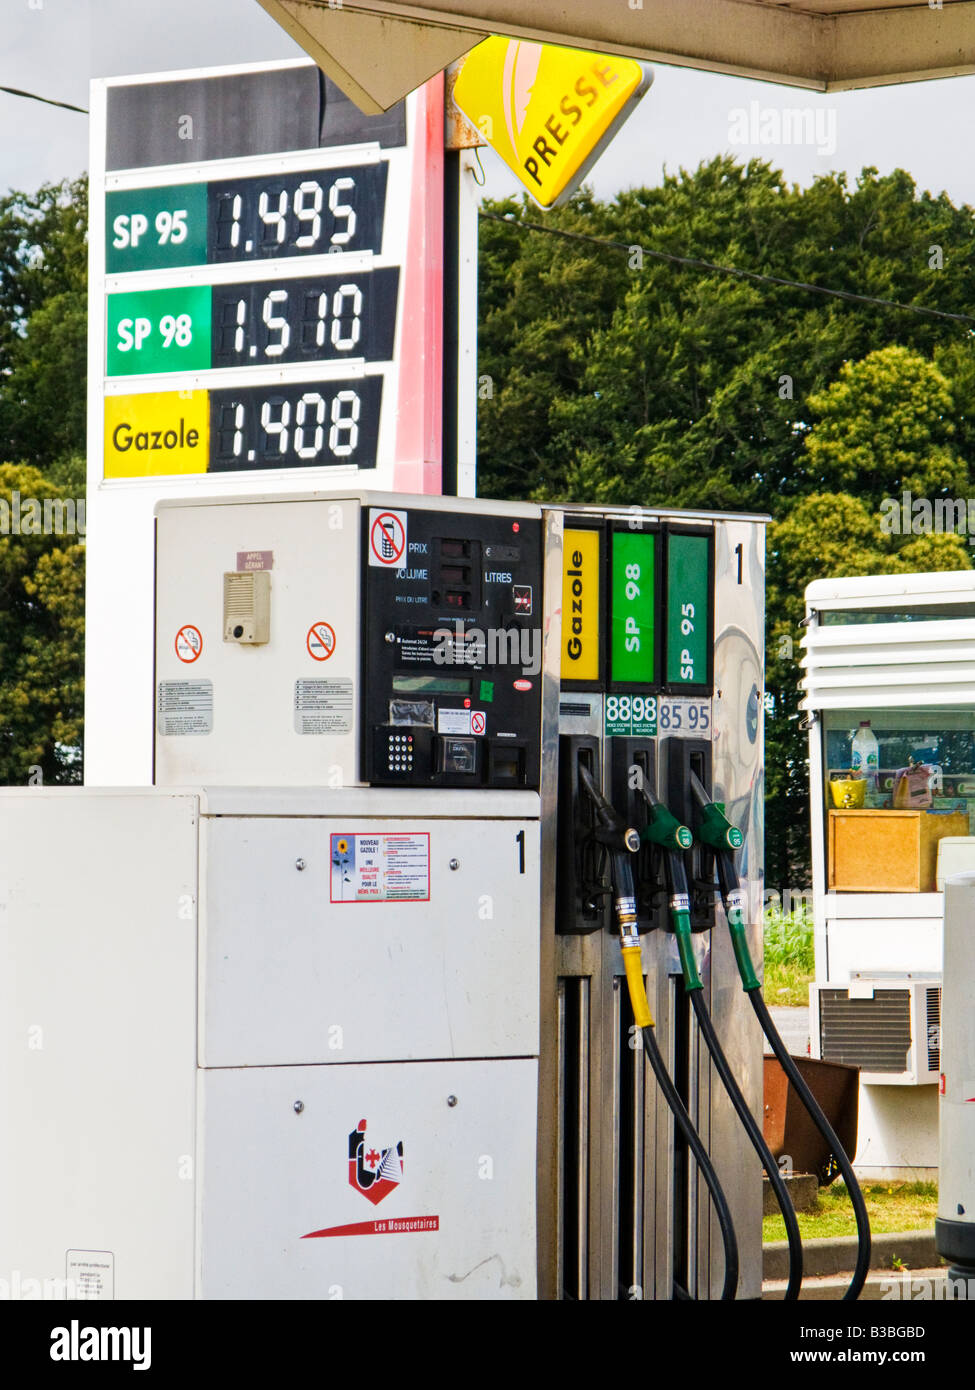 Small supermarket based petrol station in France Europe showing pumps prices and payment kiosk Stock Photo